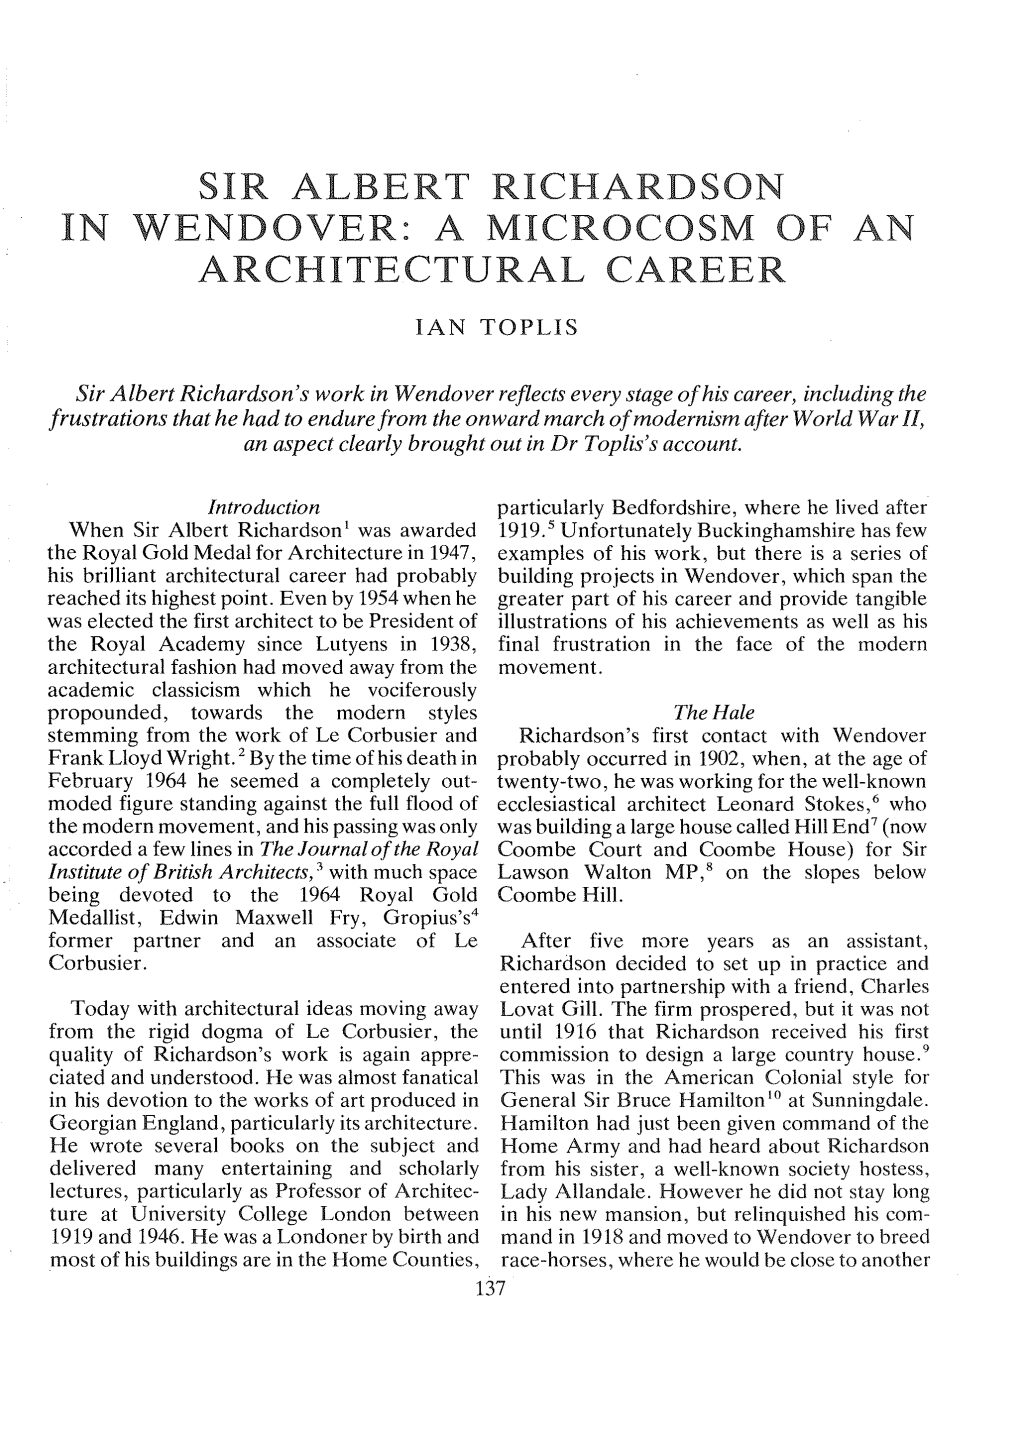 Sir Albert Richardson in Wendover: a Microcosm of an Architectural Career